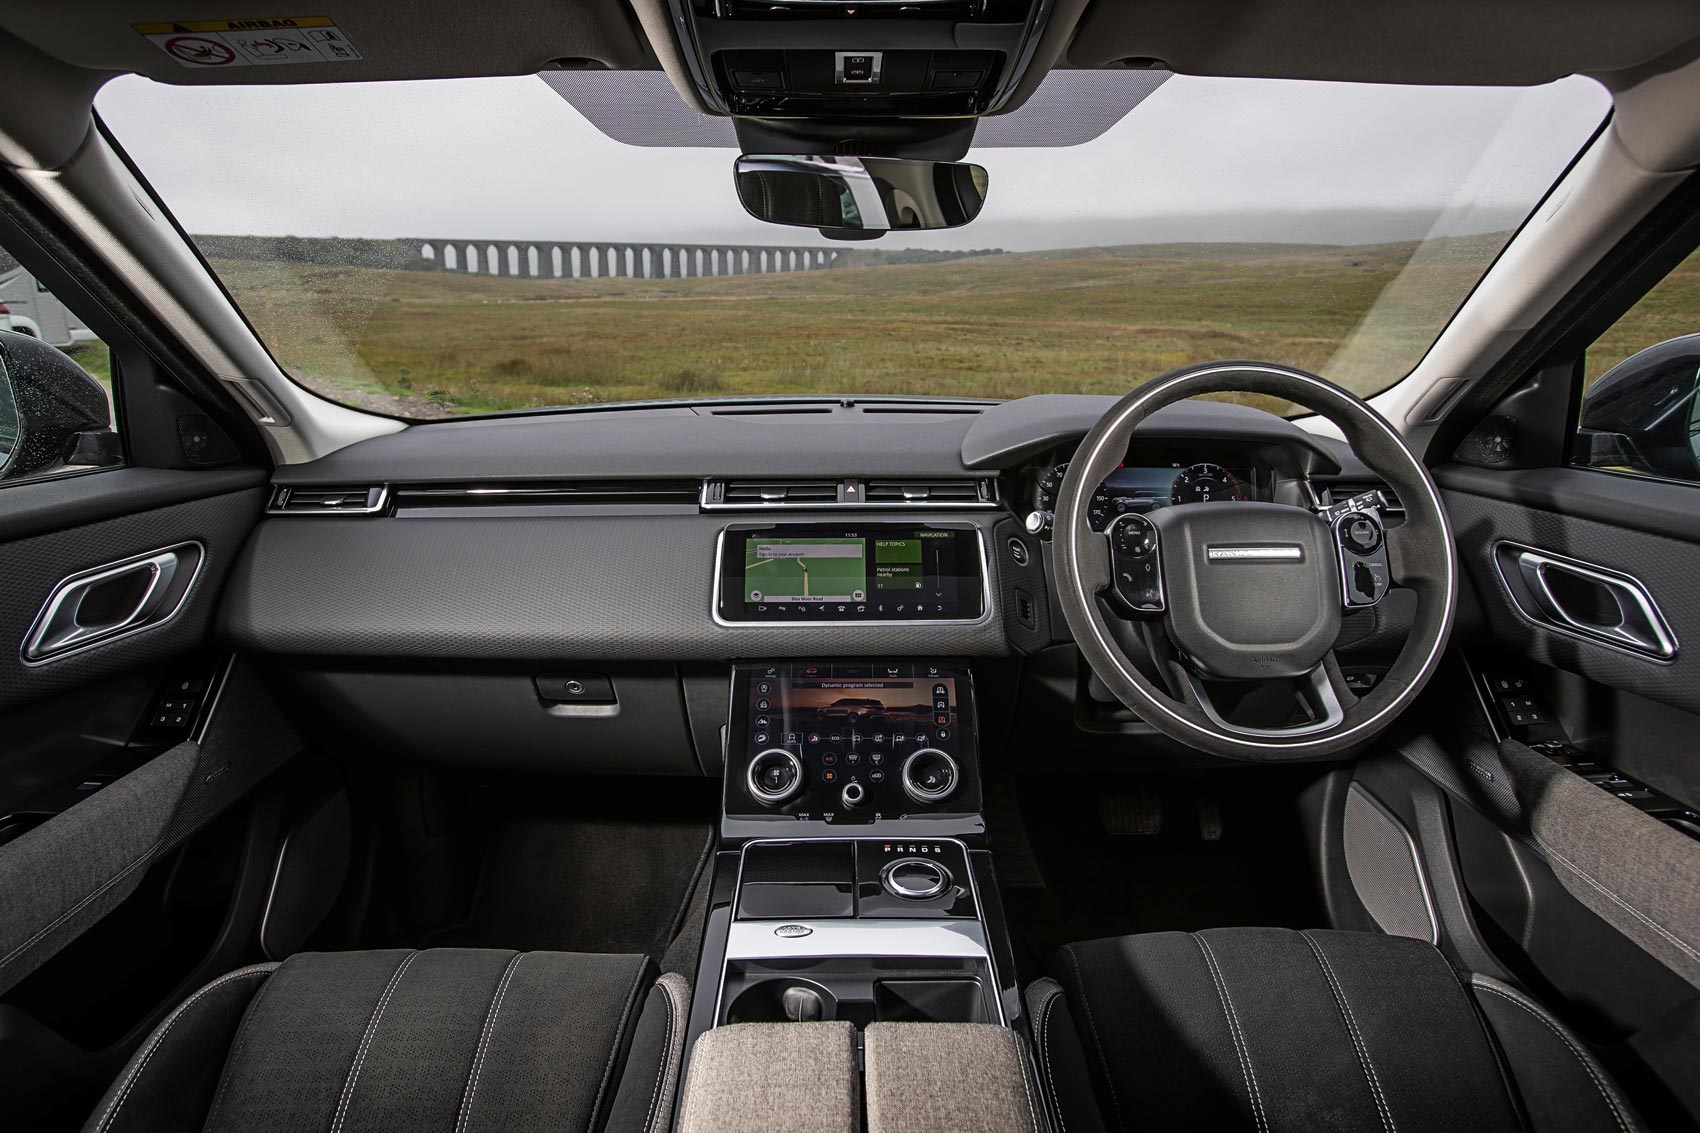 Range Rover Velar 2020 Interior Red  - Request A Dealer Quote Or View Used Cars At Msn Autos.